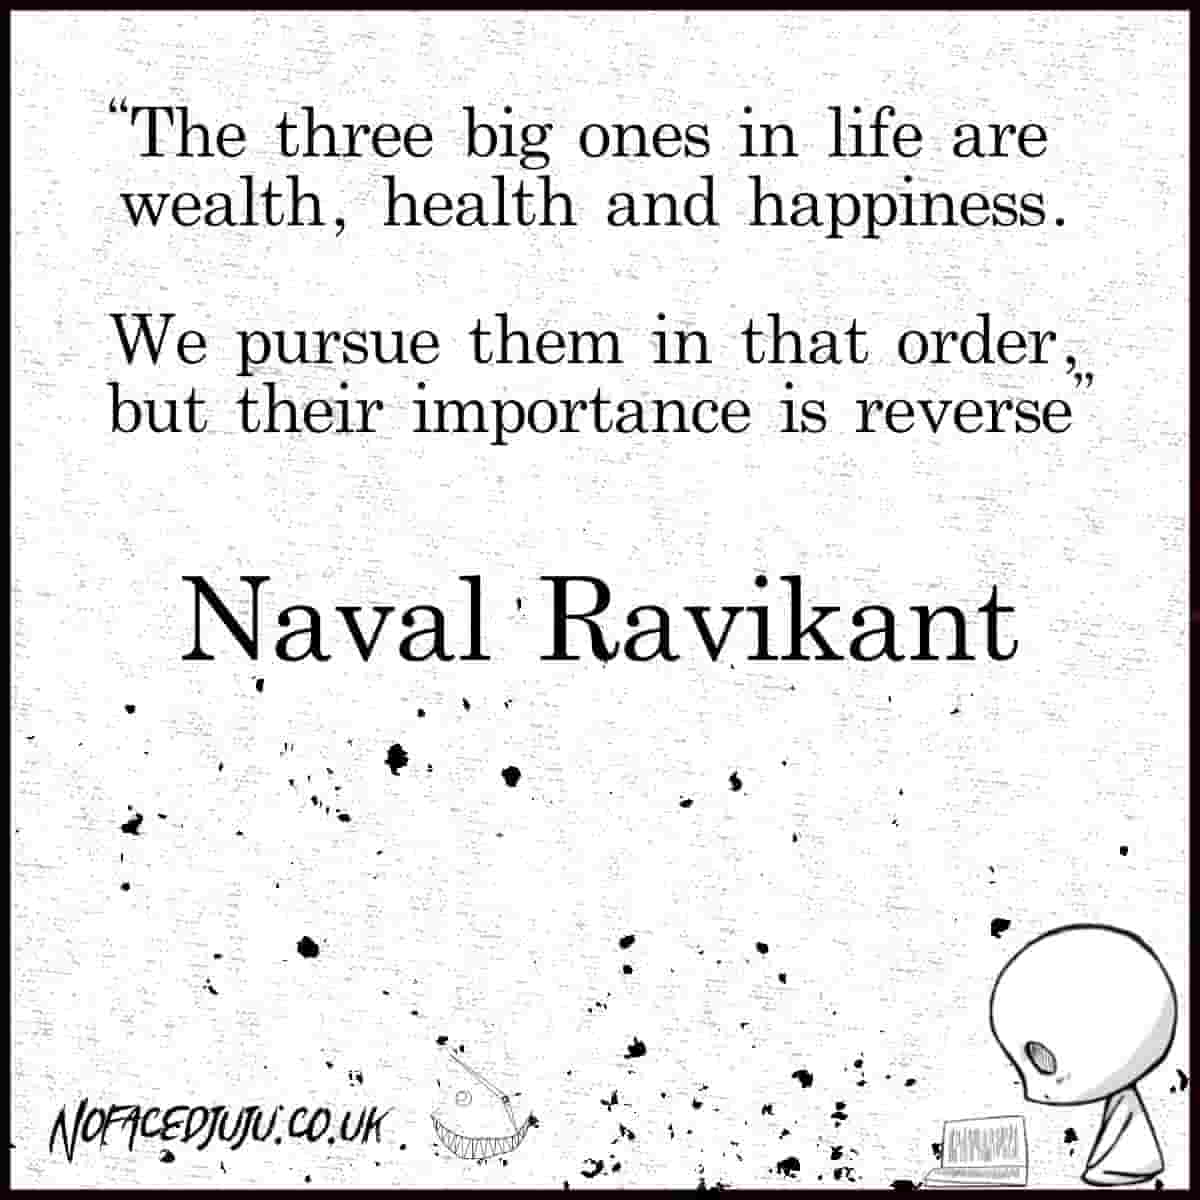 Text Showing - “The three big ones in life are wealth, health and happiness. We pursue them in that order, but their importance is reverse”